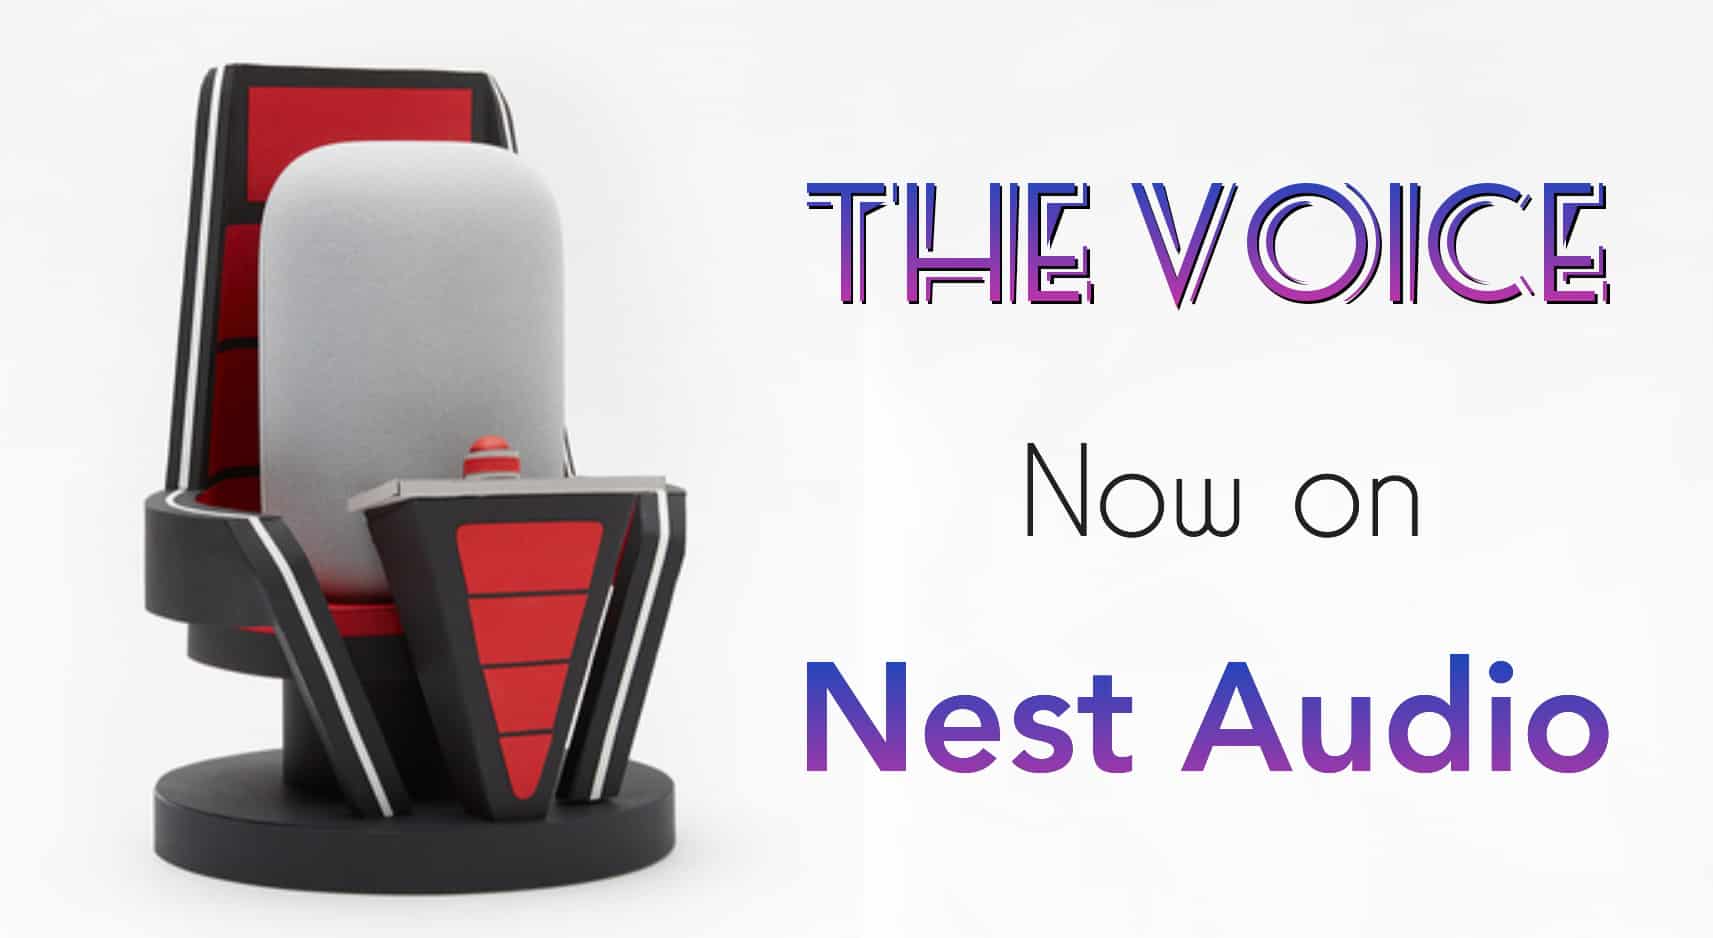 Google Partners With NBC's The Voice And Brings It to Nest Audio